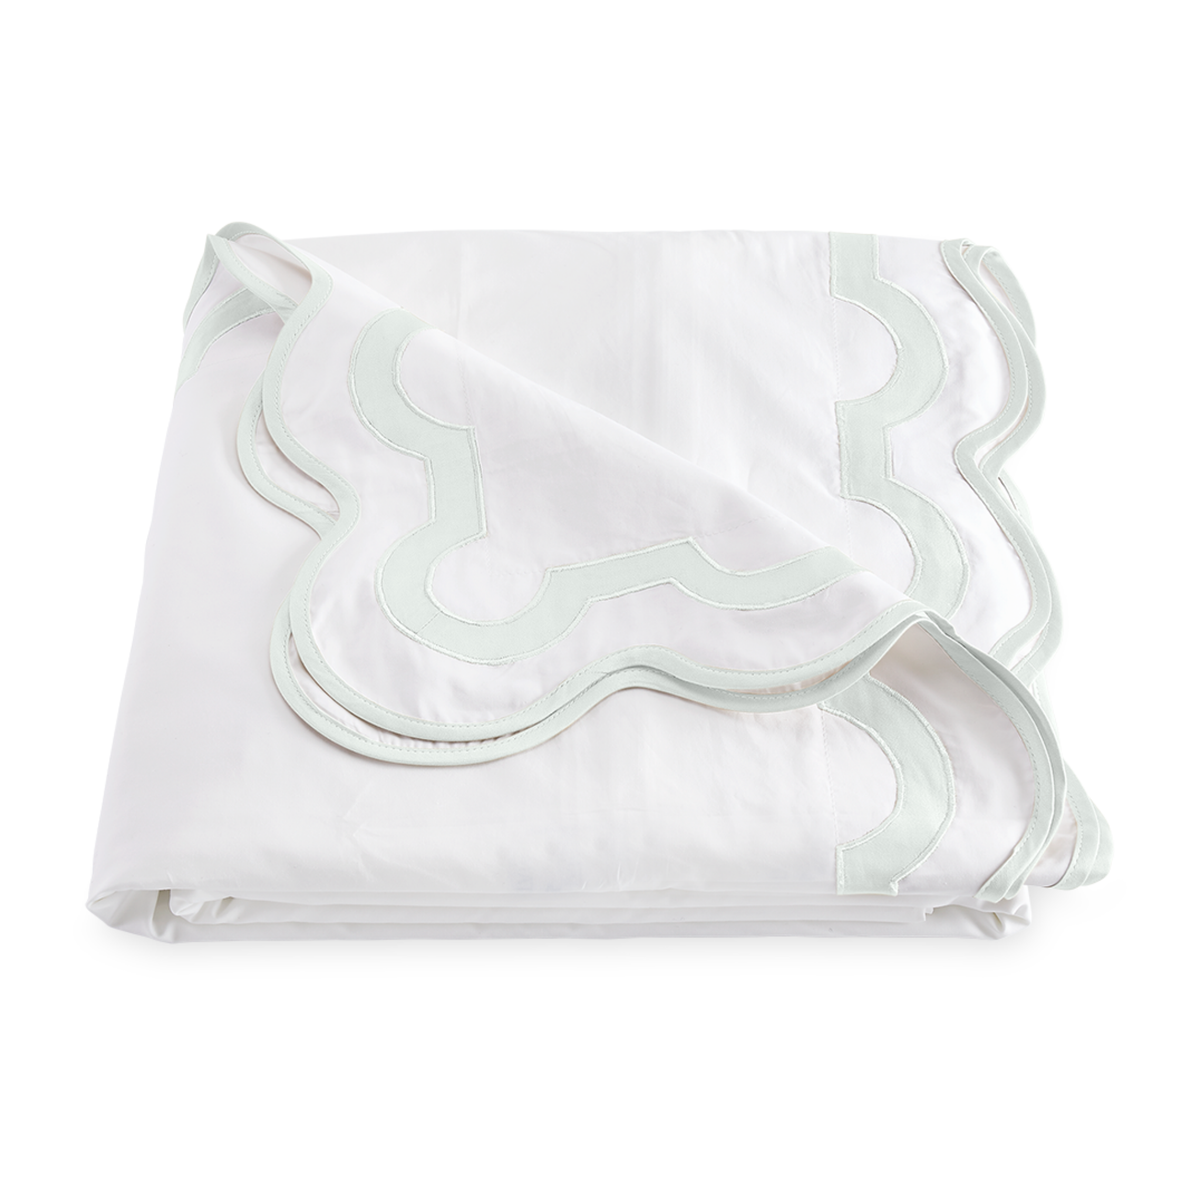 Folded Duvet Cover of Matouk Mirasol Collection in Opal Color